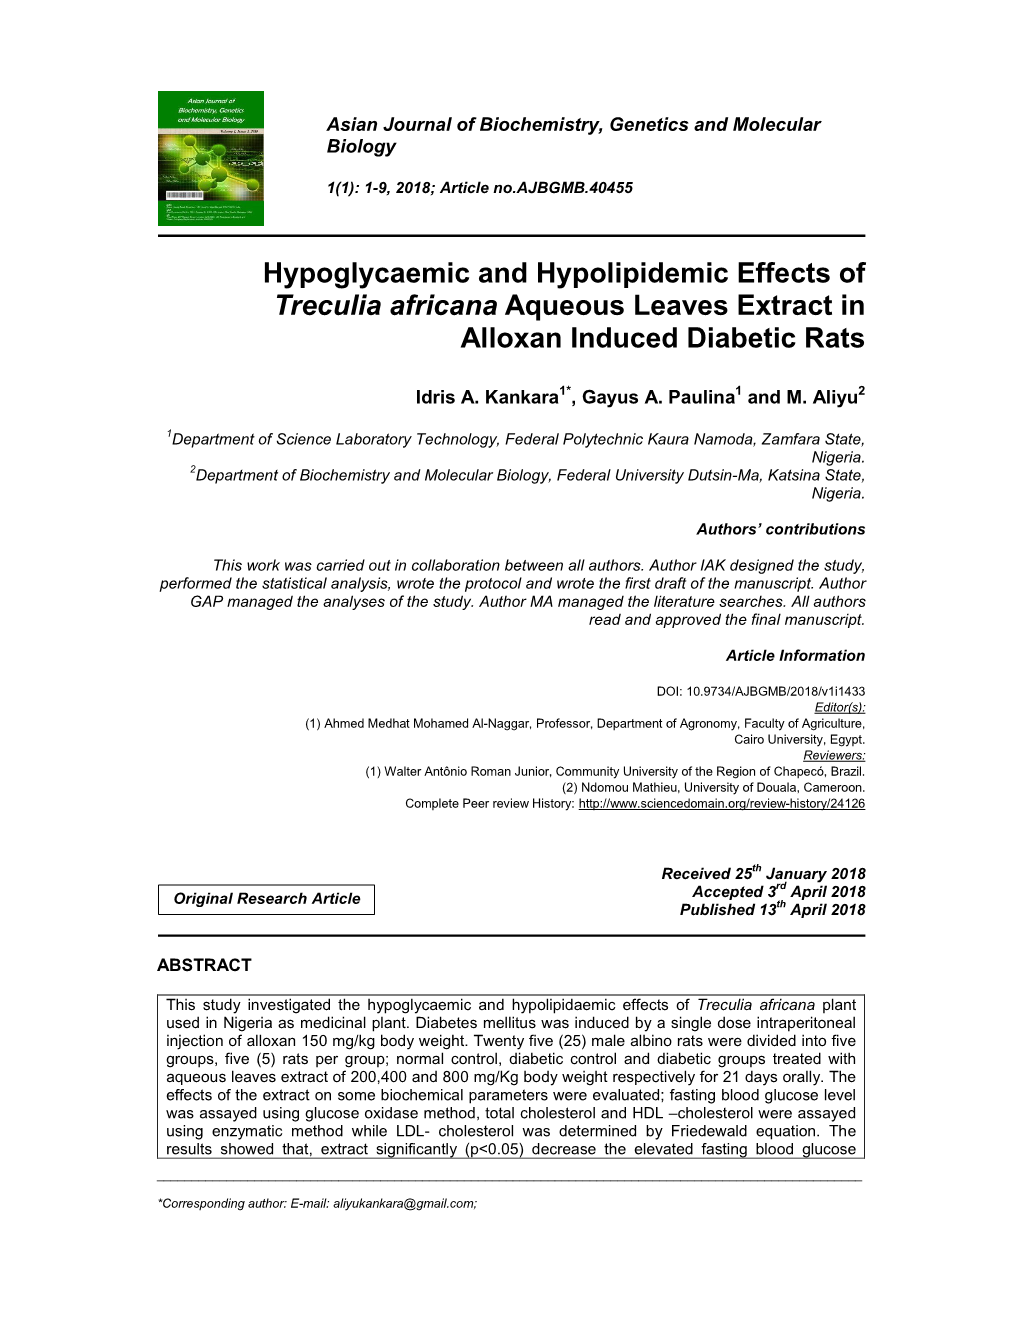 Hypoglycaemic and Hypolipidemic Effects of Treculia Africana Aqueous Leaves Extract in Alloxan Induced Diabetic Rats